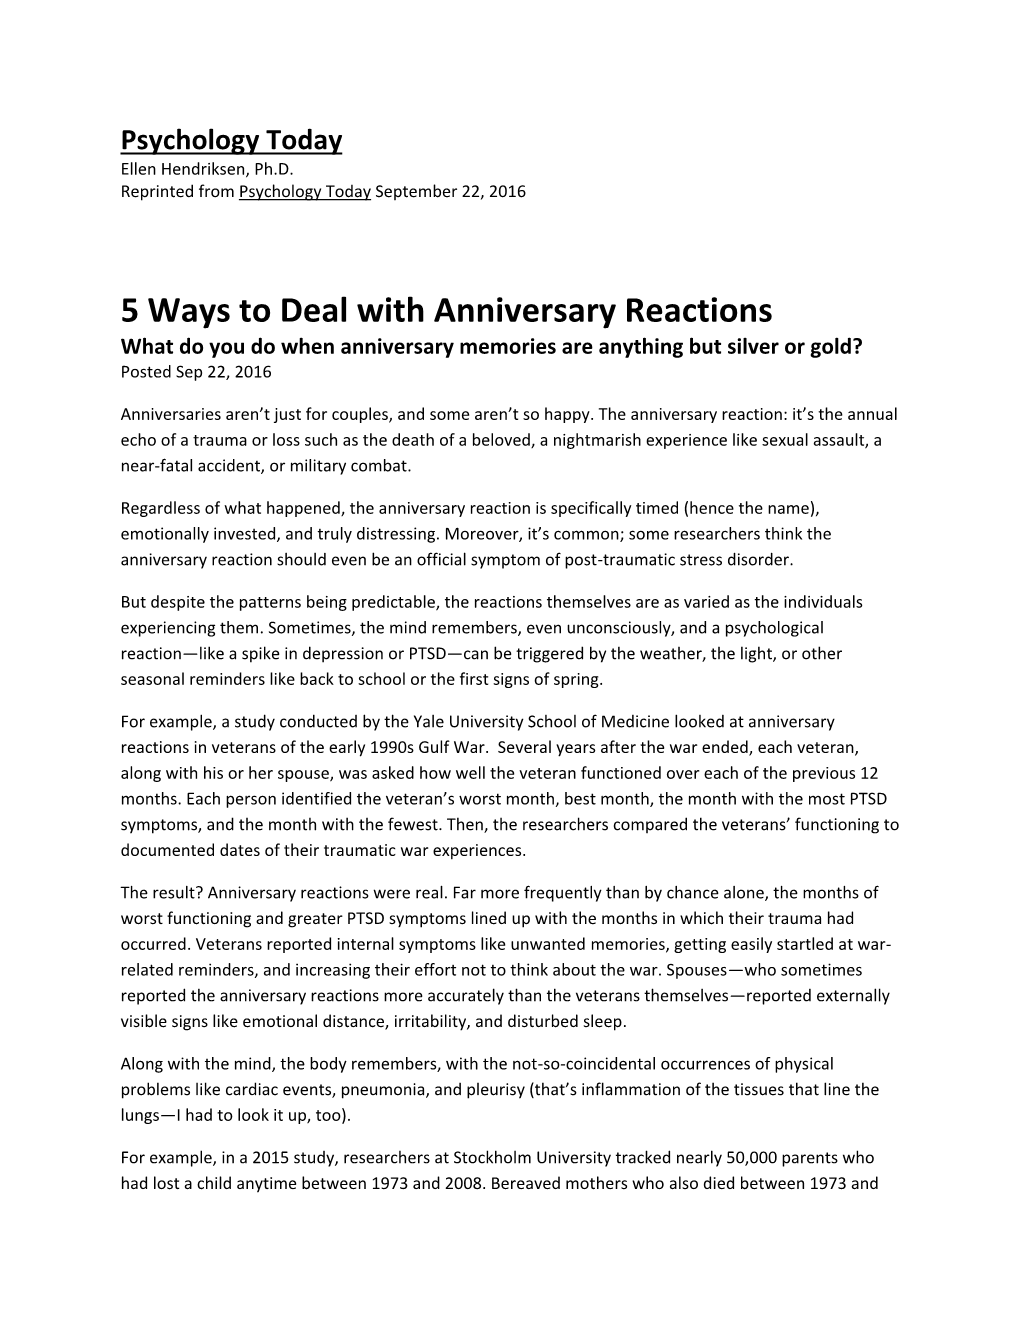 5 Ways to Deal with Anniversary Reactions What Do You Do When Anniversary Memories Are Anything but Silver Or Gold? Posted Sep 22, 2016